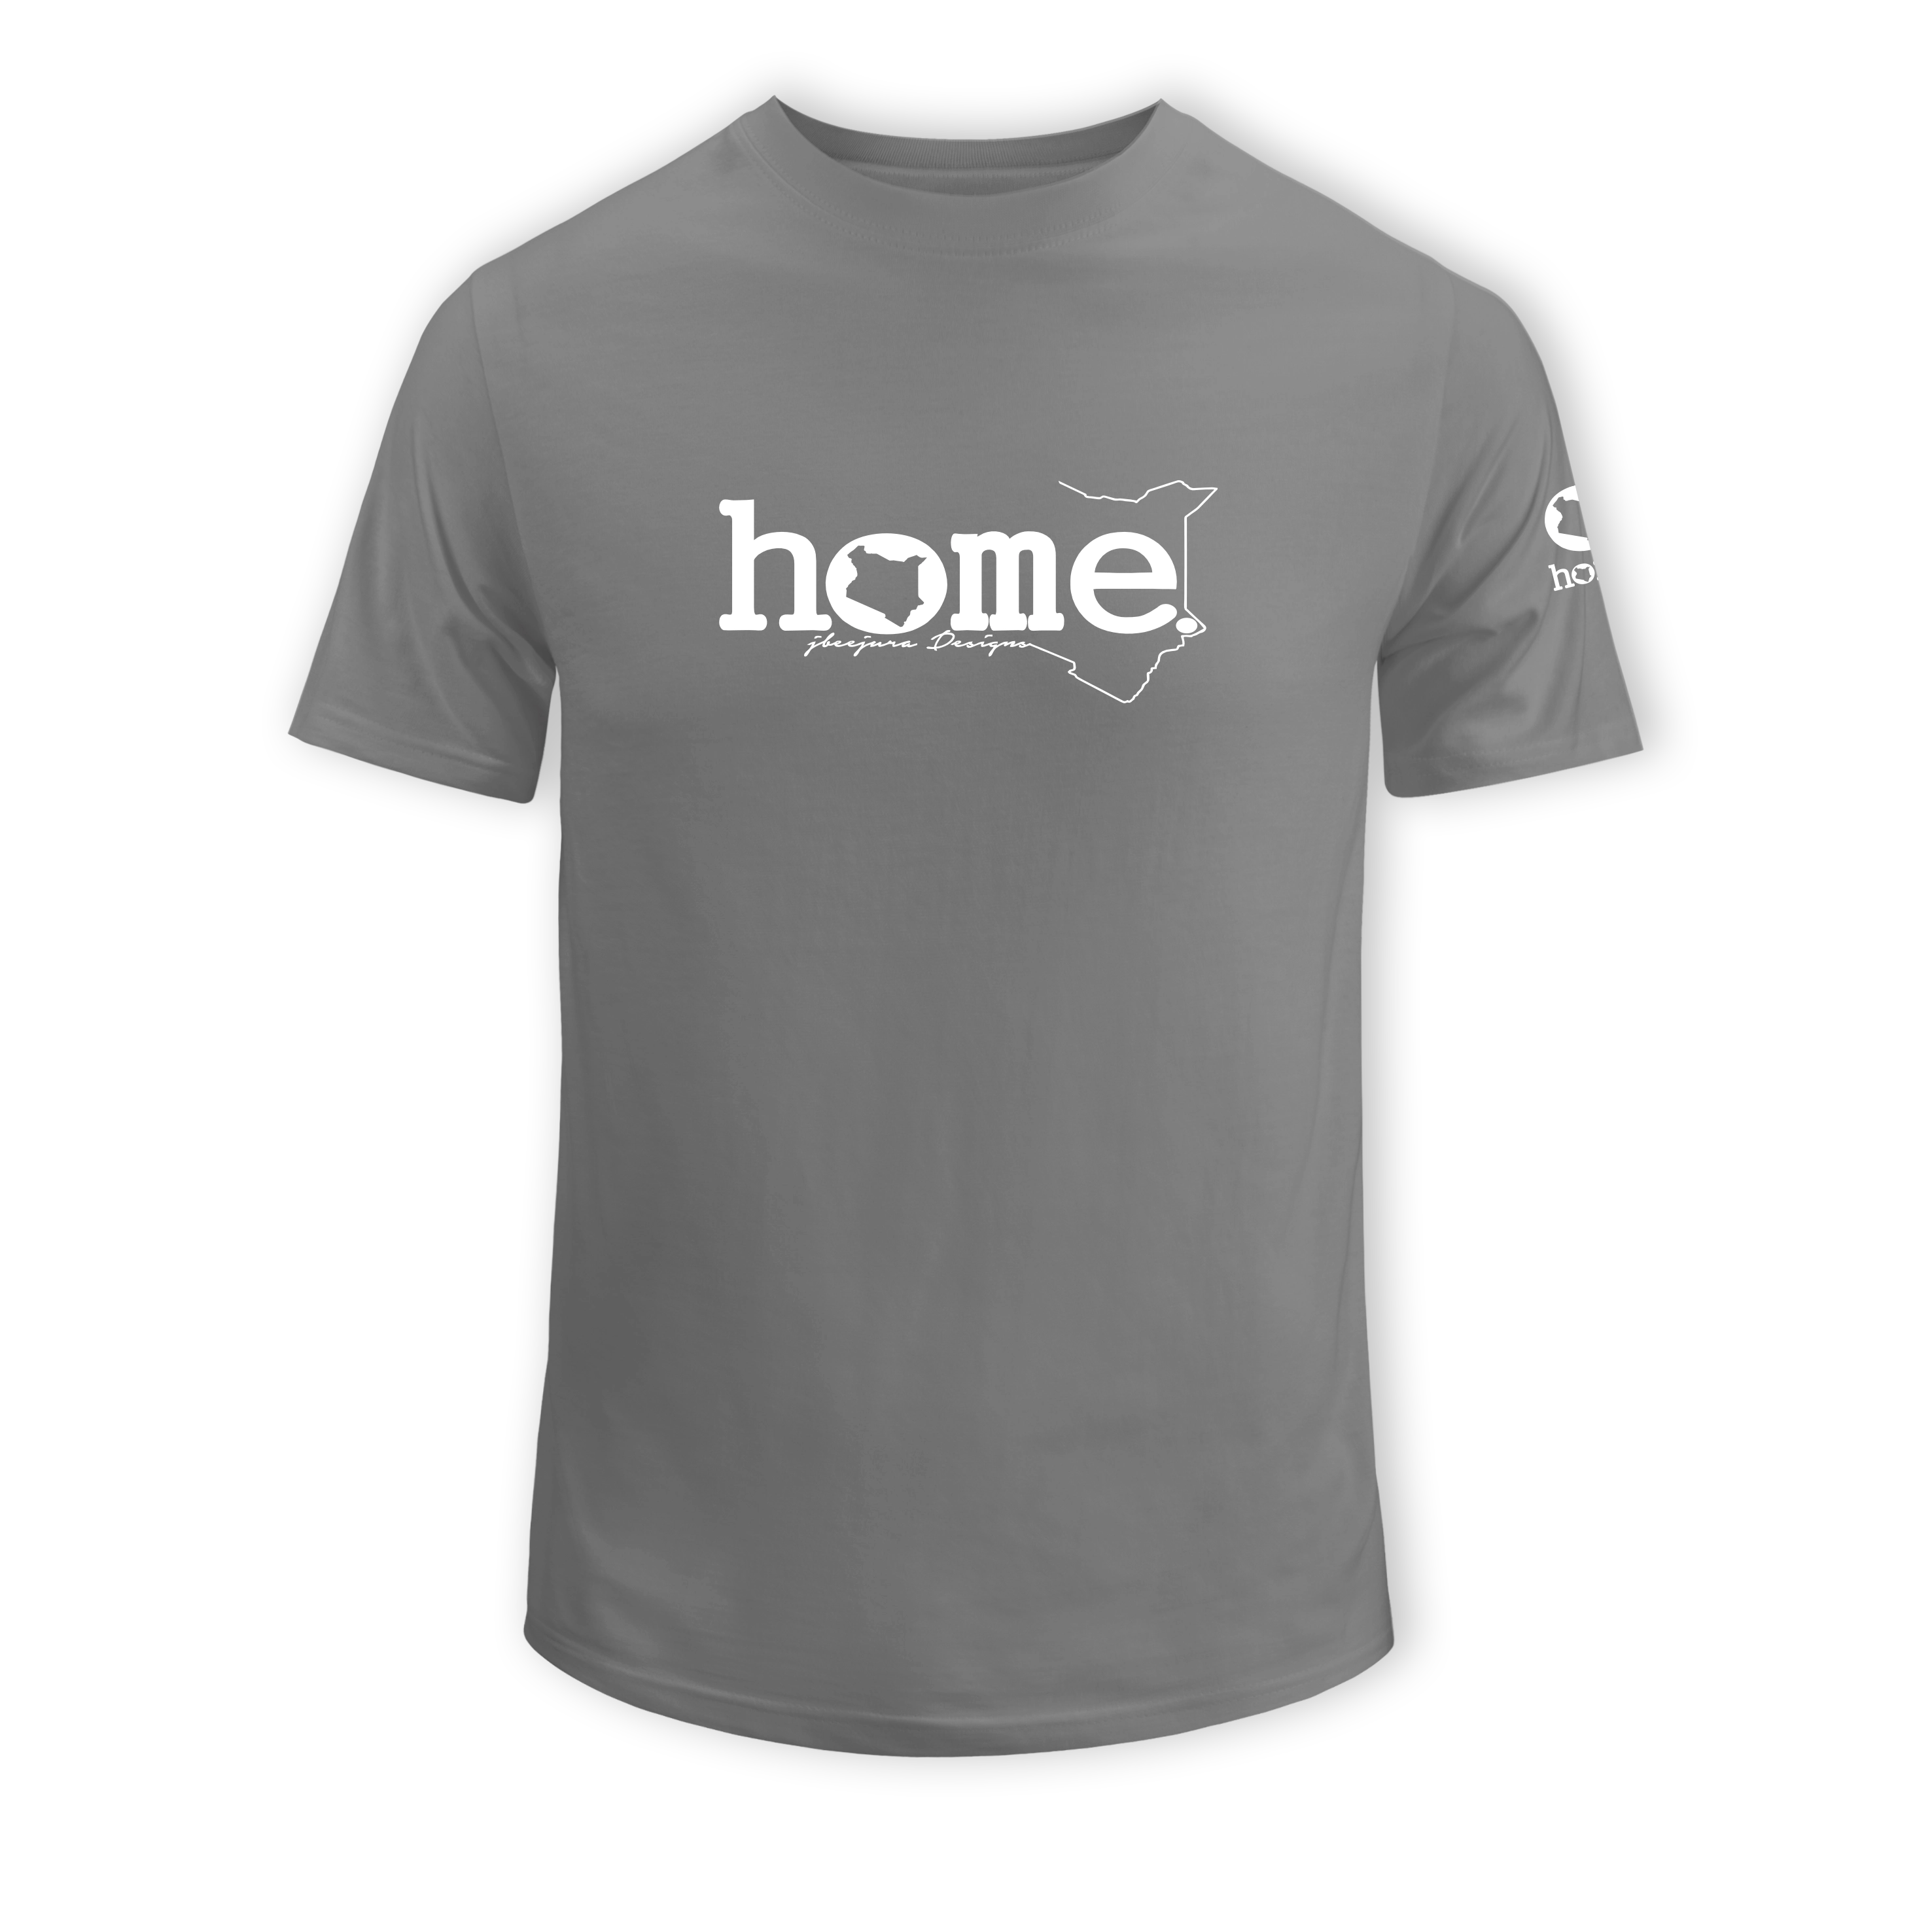 home_254 SHORT-SLEEVED SAGE T-SHIRT WITH A WHITE CLASSIC WORDS PRINT – COTTON PLUS FABRIC